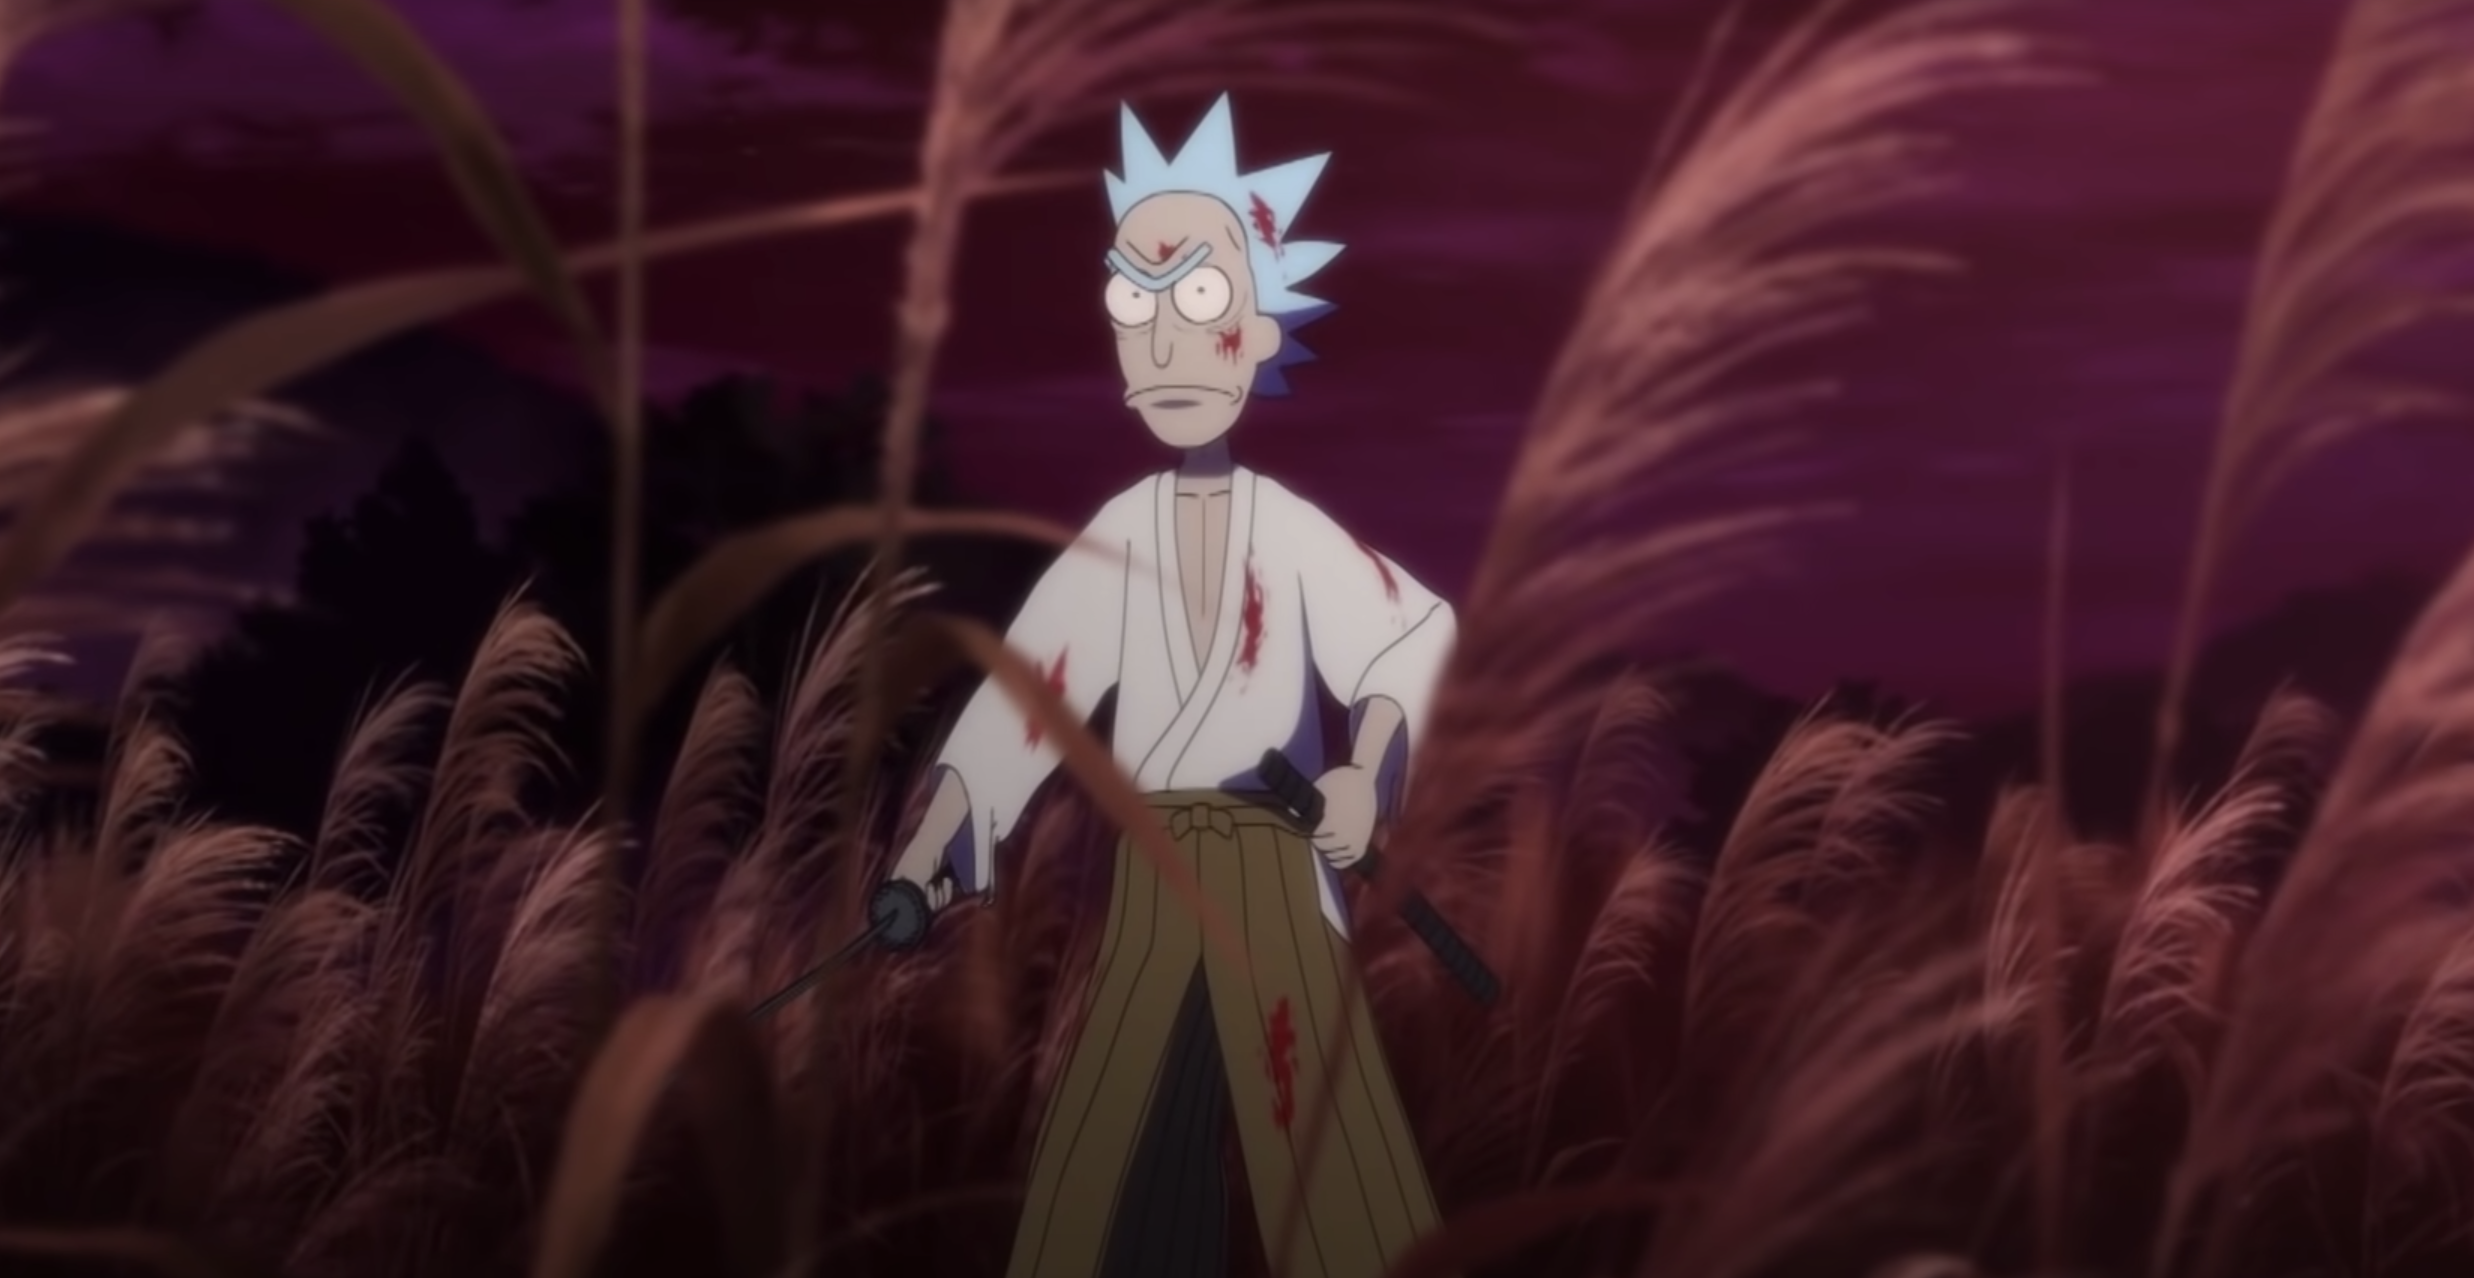 Adult Swim Just Dropped a Bloody Rick and Morty Anime Short